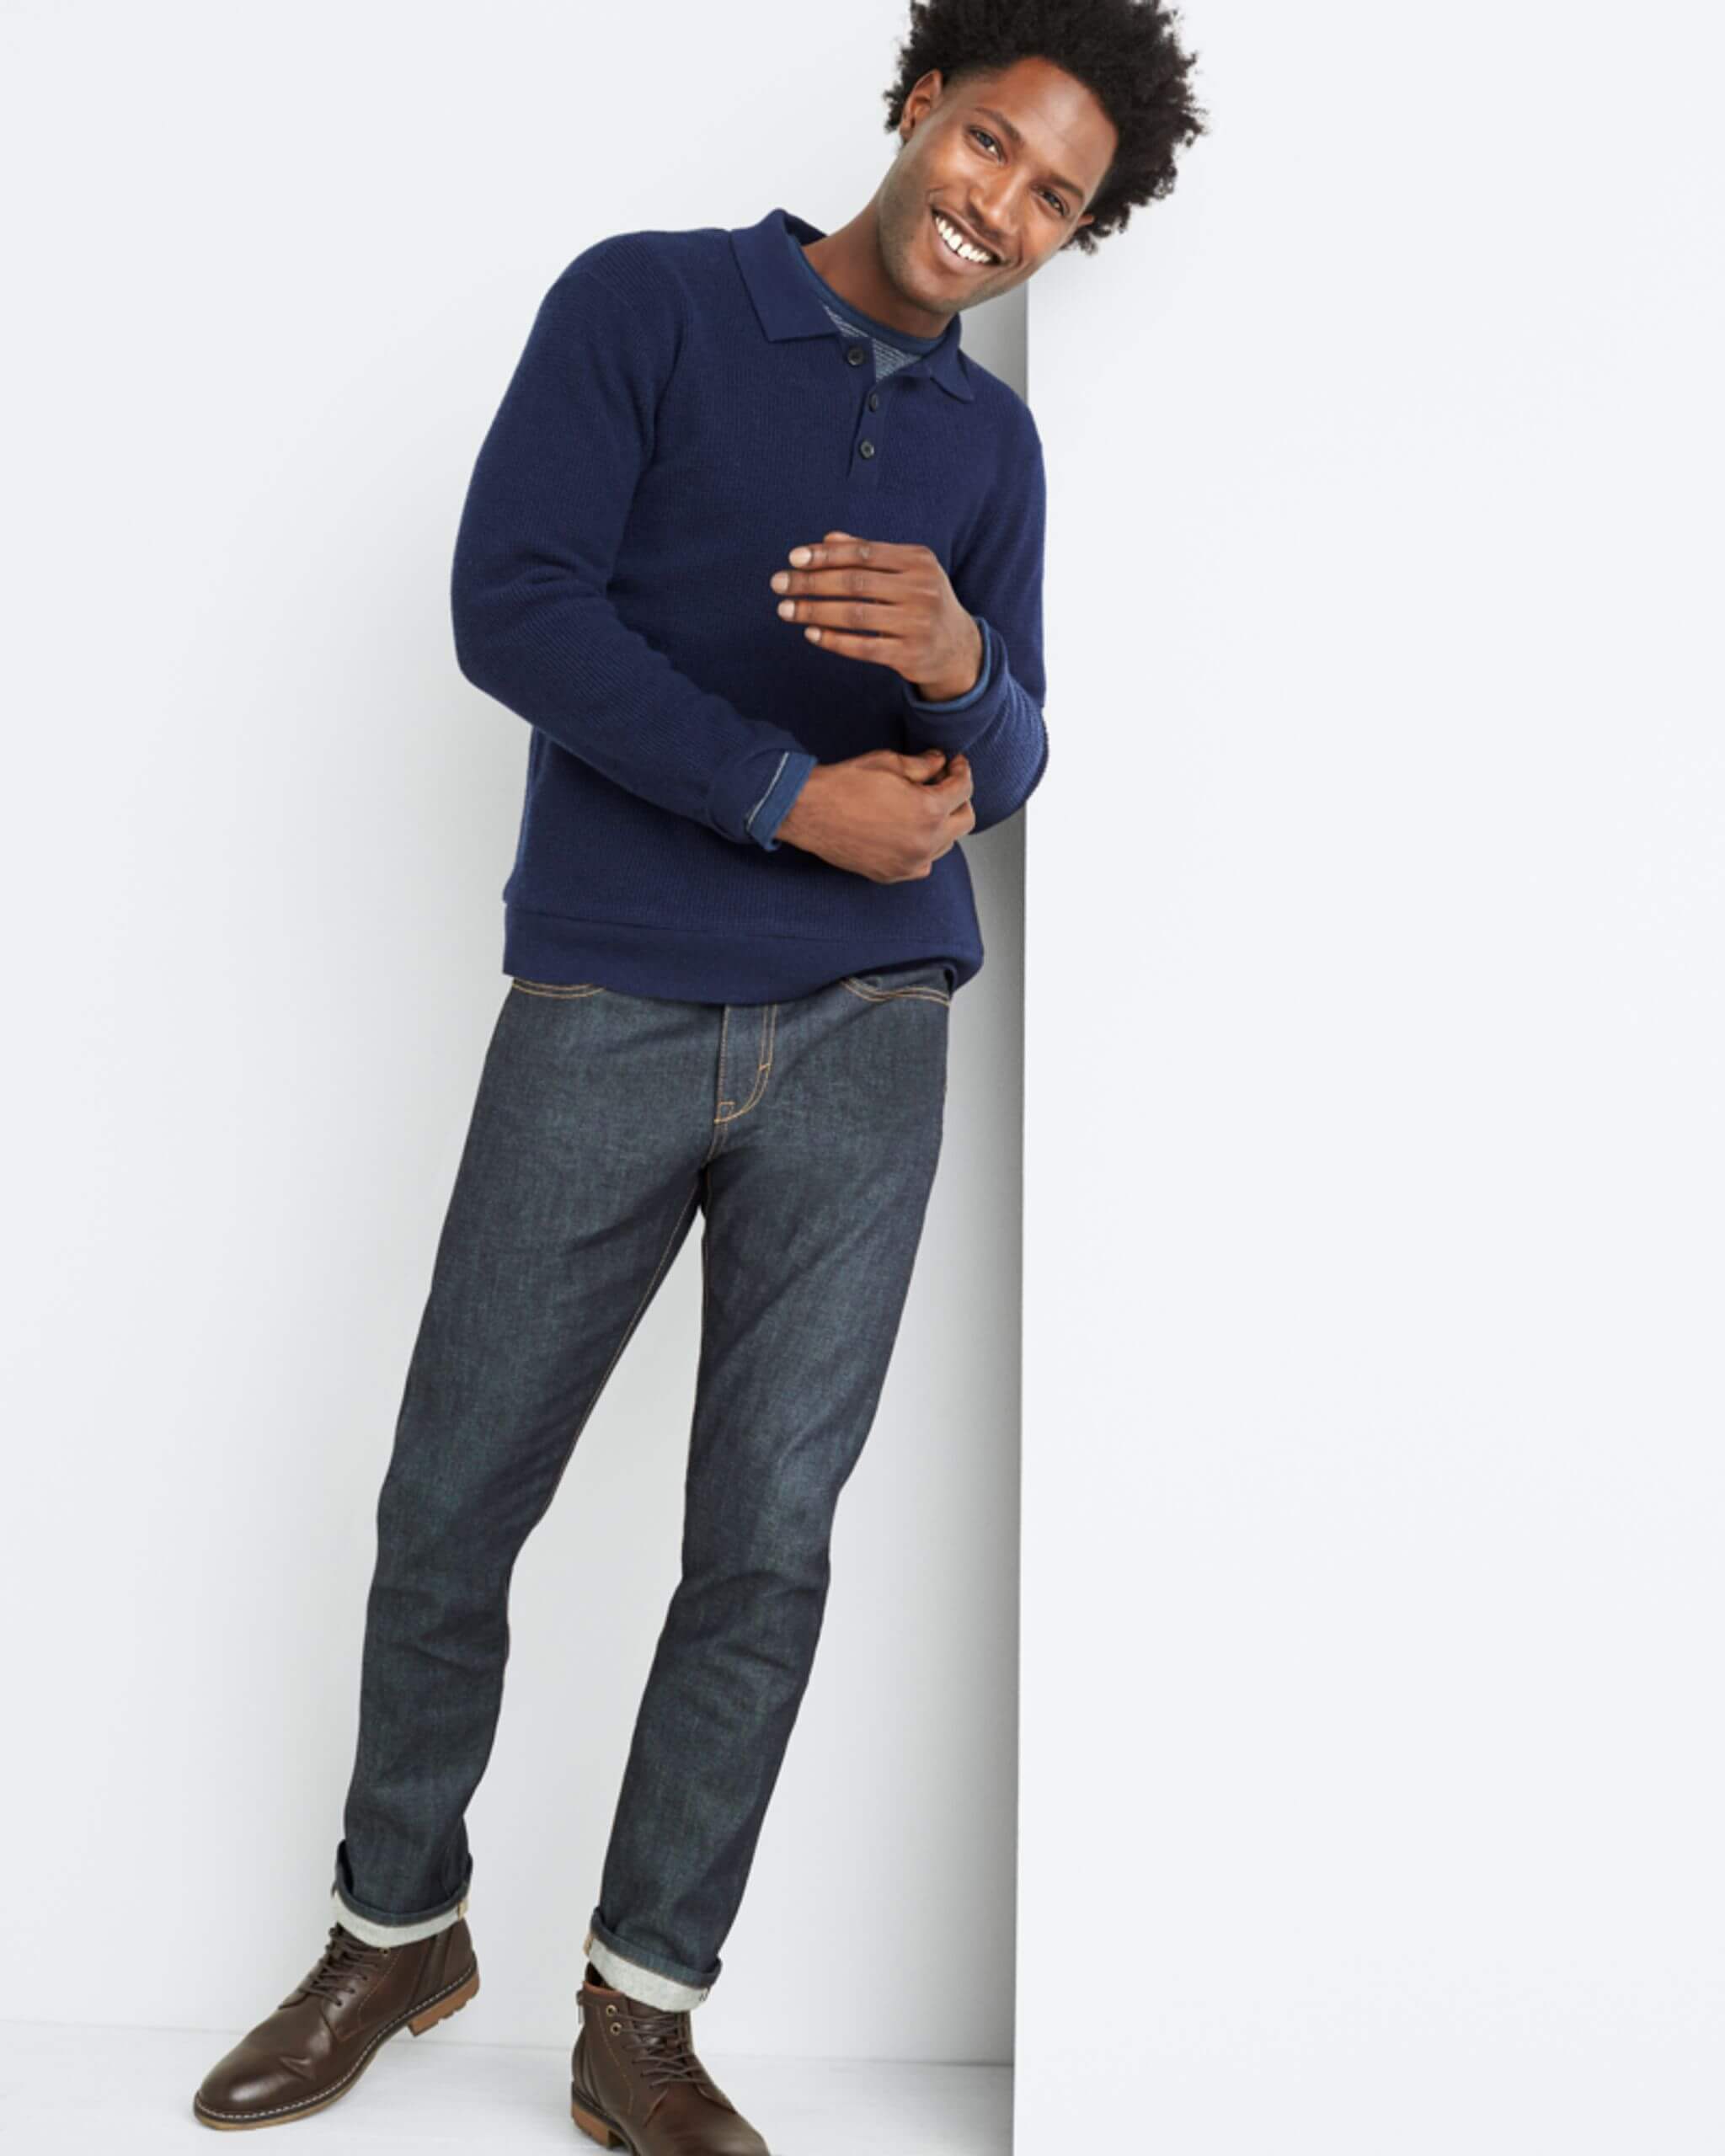 Stitch Fix Men’s model standing wearing navy polo sweater over navy crew neck shirt with slim-fit jeans and brown combat boots.